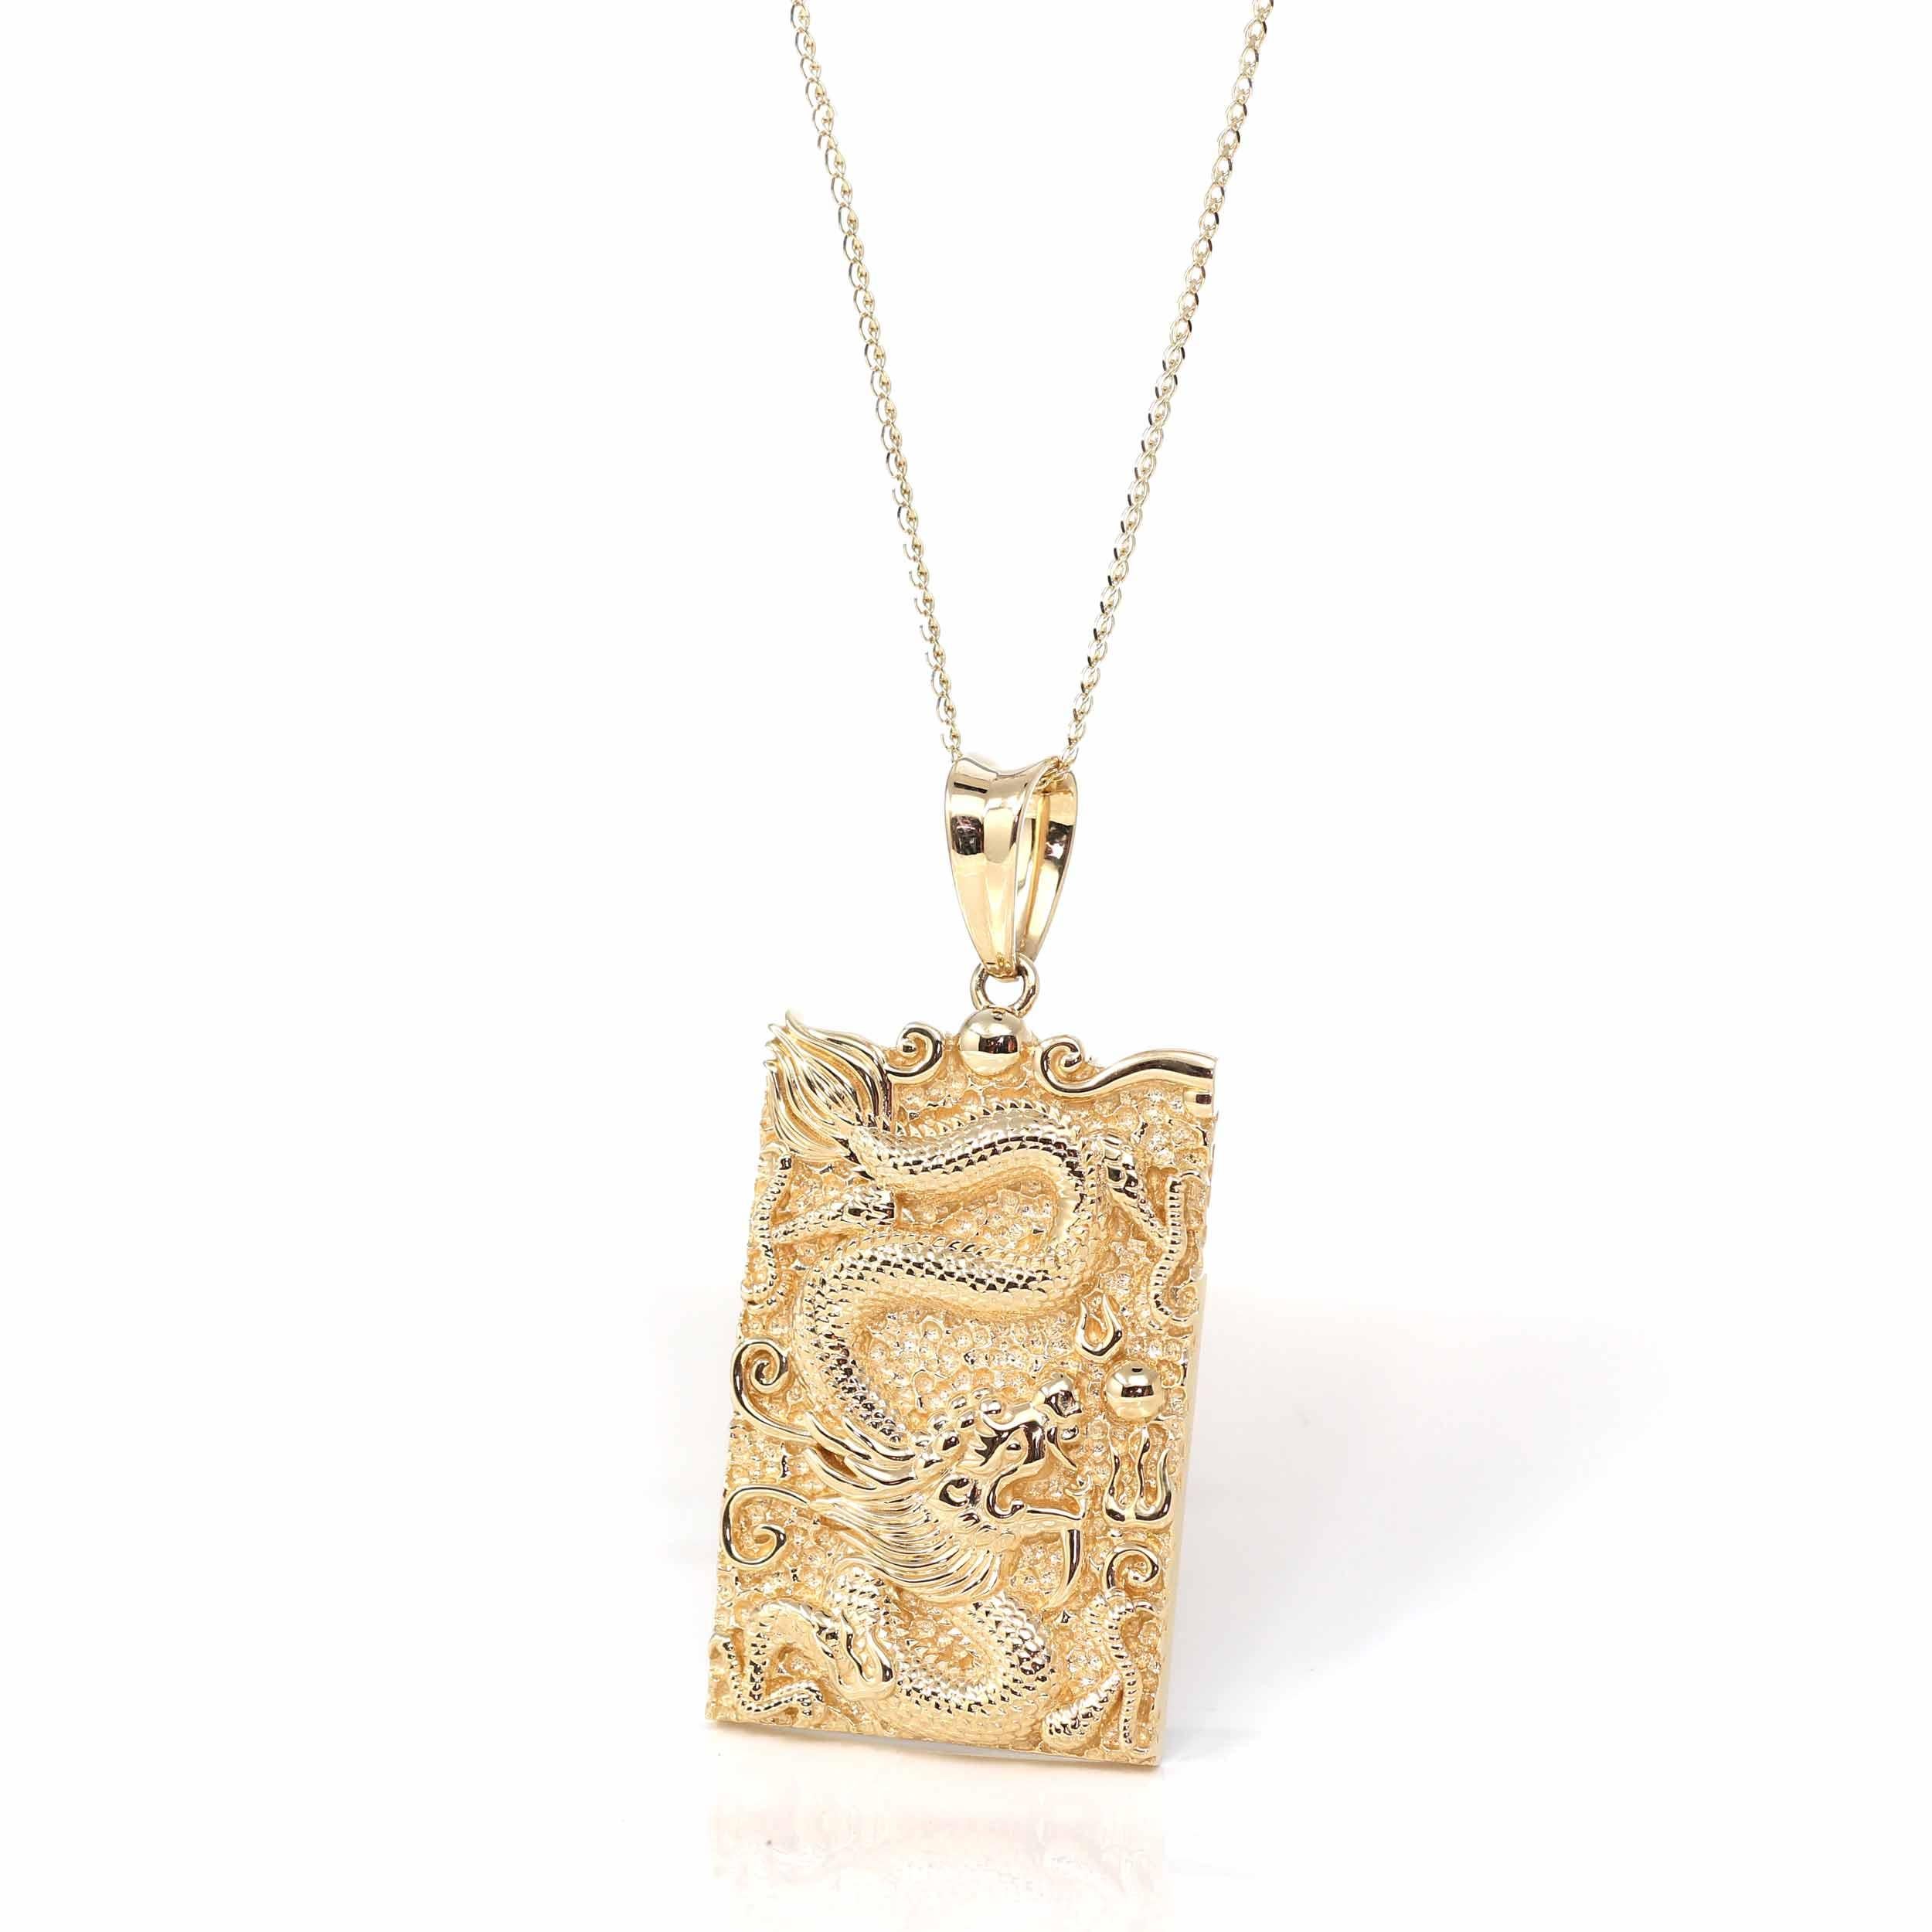 Design Concept--- This pendant is made with 14K yellow pure gold. Depicts a powerful dragon soaring in the clouds. In Asian culture, the dragons are a symbol of good luck, authority and protection. It's very detailed and exquisite. The one of a kind